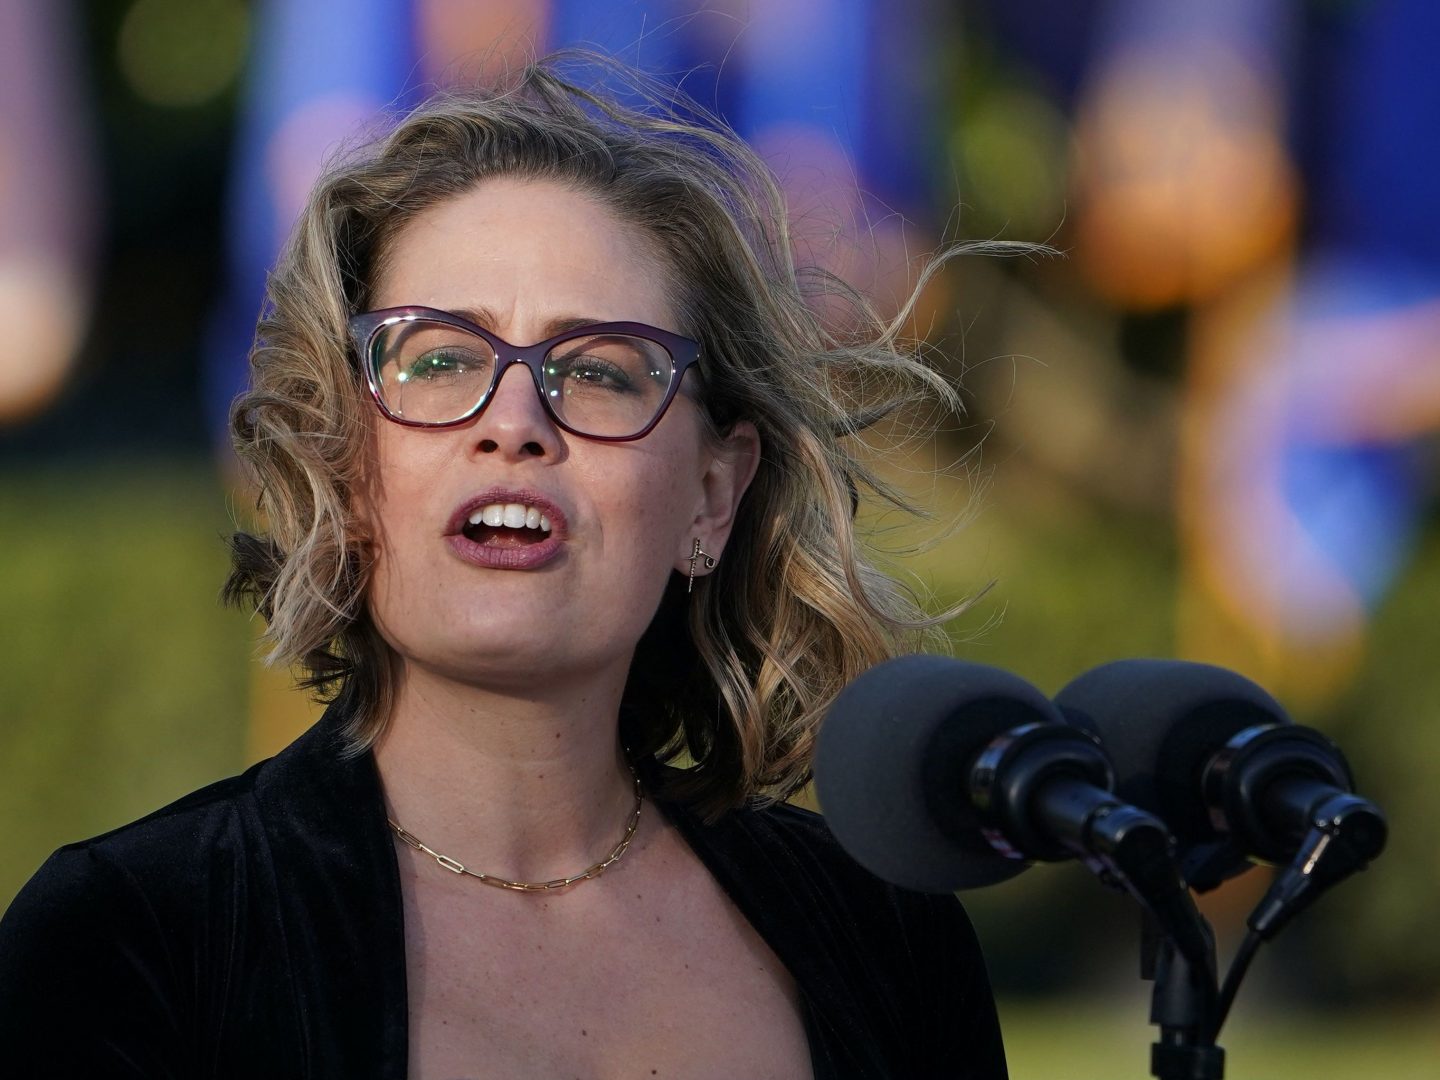 US Senator Kyrsten Sinema (D-AZ) speaks during a signing ceremony for H.R. 3684, the Infrastructure Investment and Jobs Act on the South Lawn of the White House in Washington, DC on November 15, 2021. (Photo by MANDEL NGAN / AFP) (Photo by MANDEL NGAN/AFP via Getty Images)